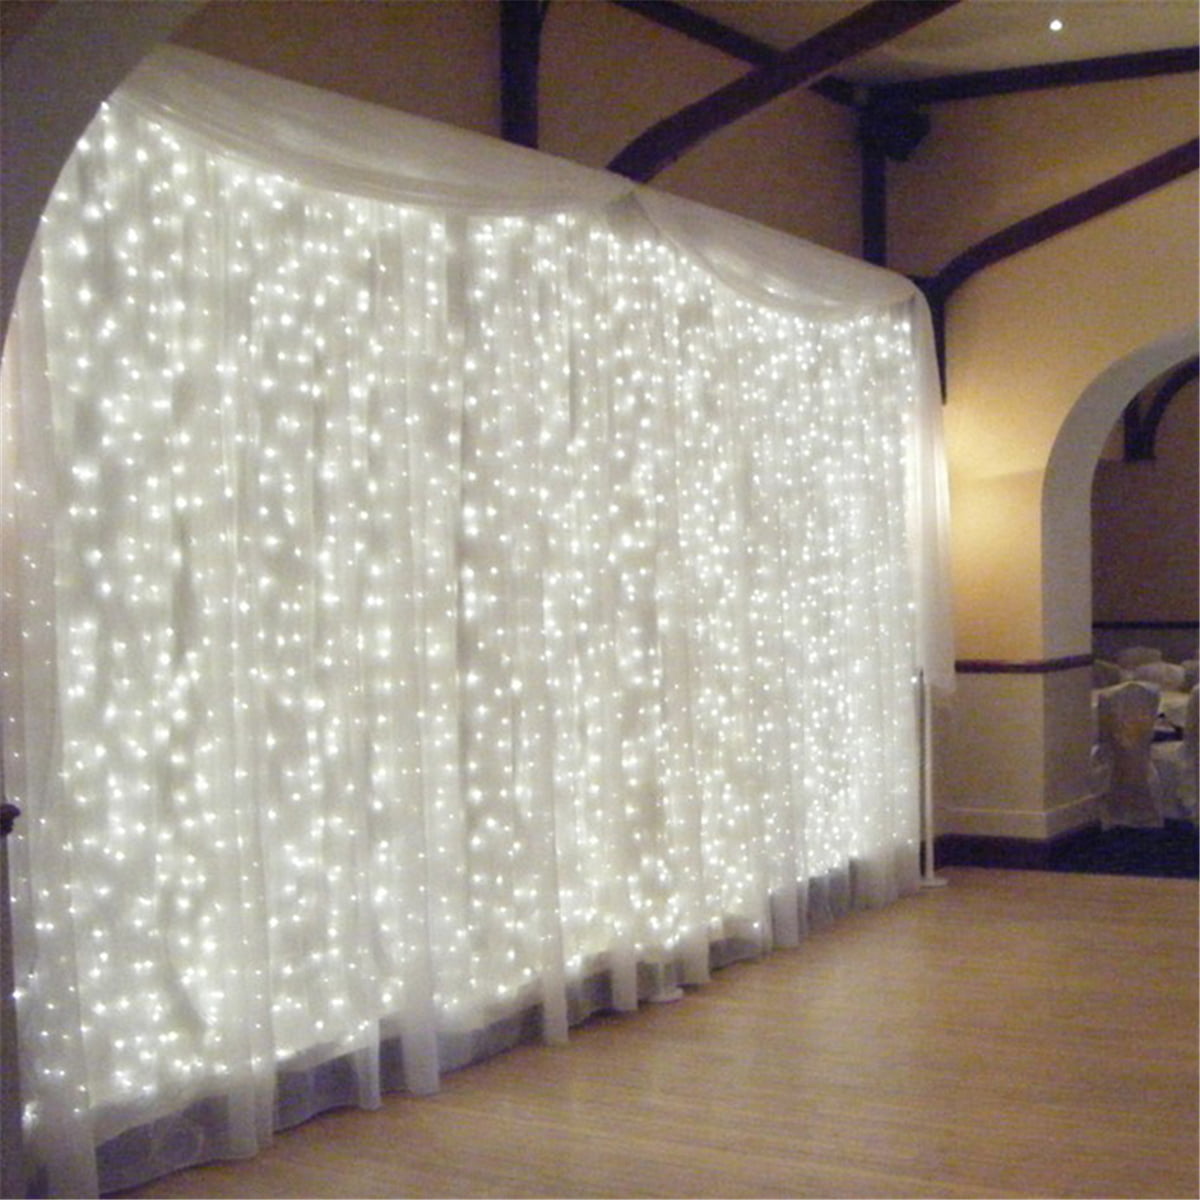 180 to 360 LED Fairy Lights 8 functions LED Light Curtain Warm White Chip 